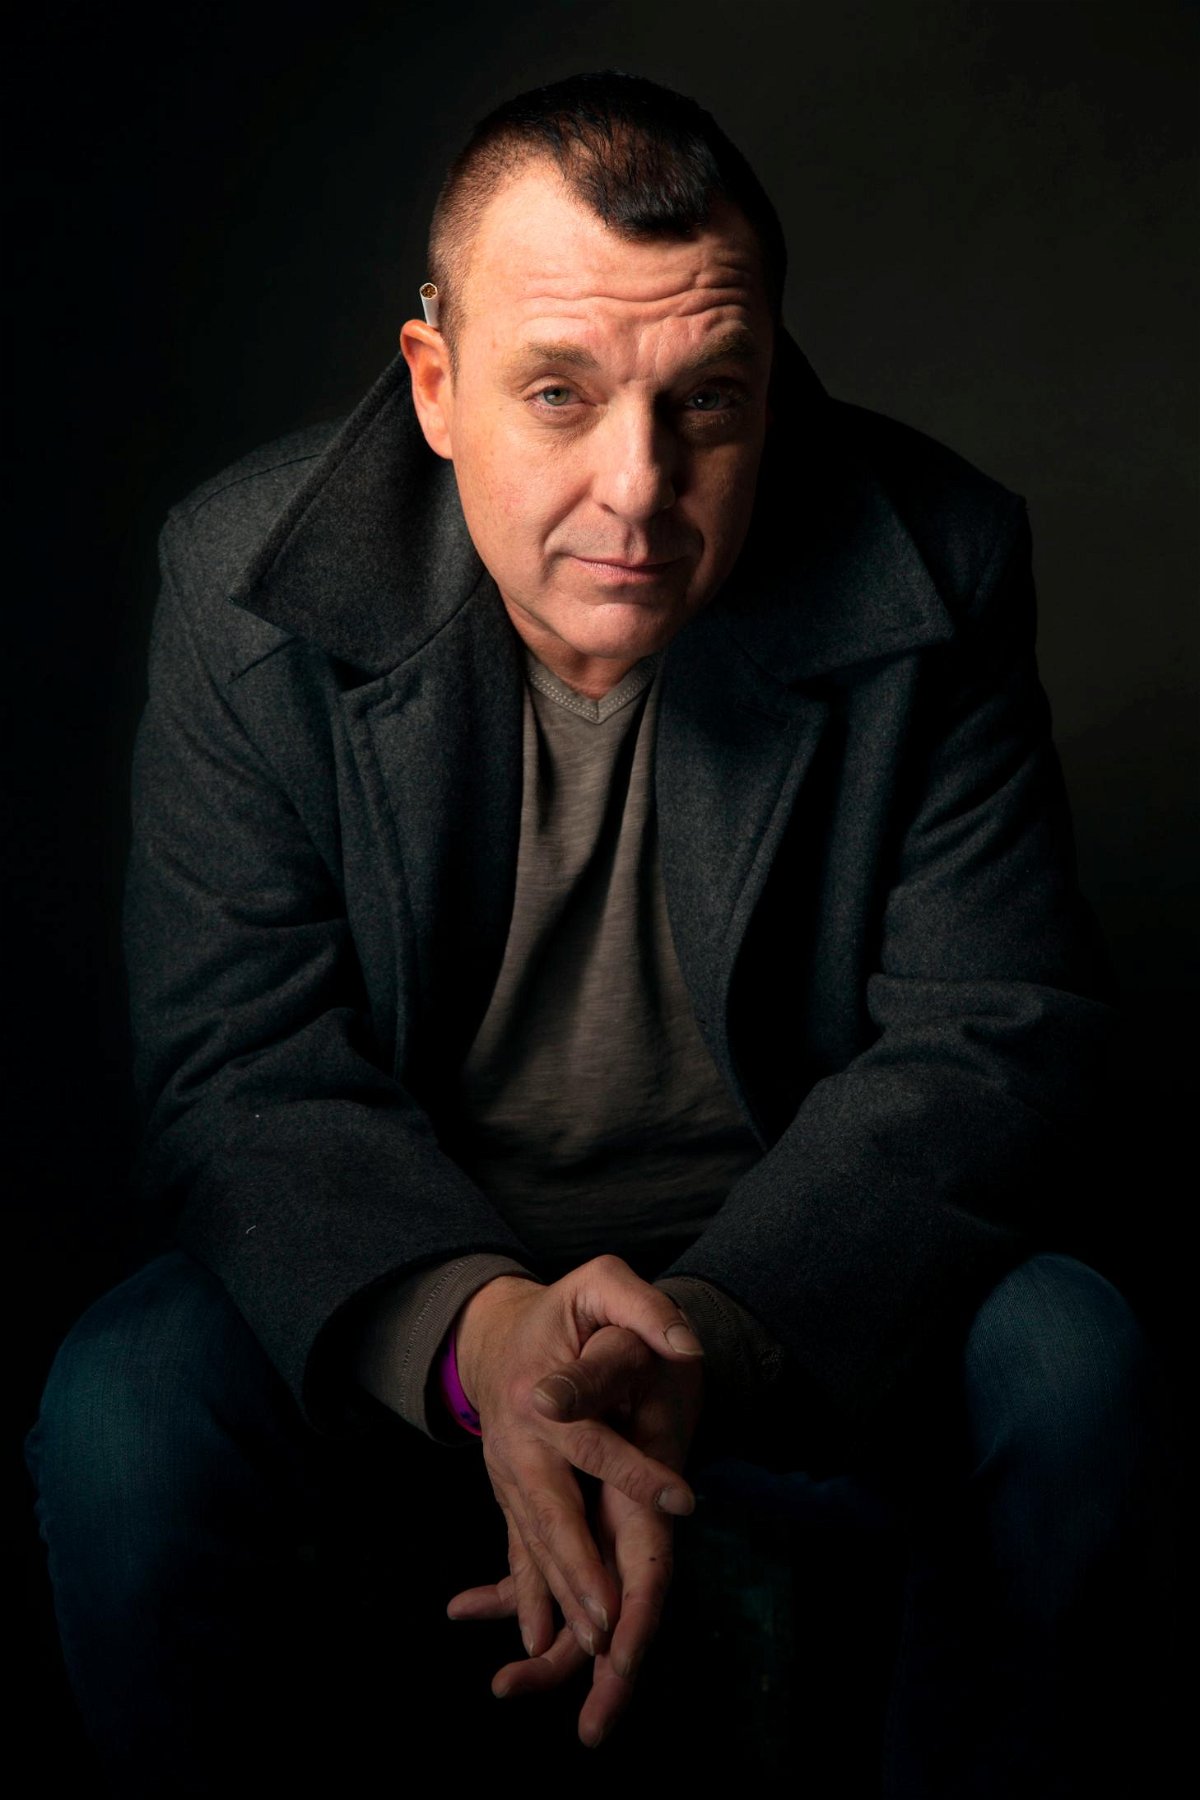 <i>Victoria Will/Invision/AP</i><br/>Tom Sizemore is seen here in 2014 in Park City